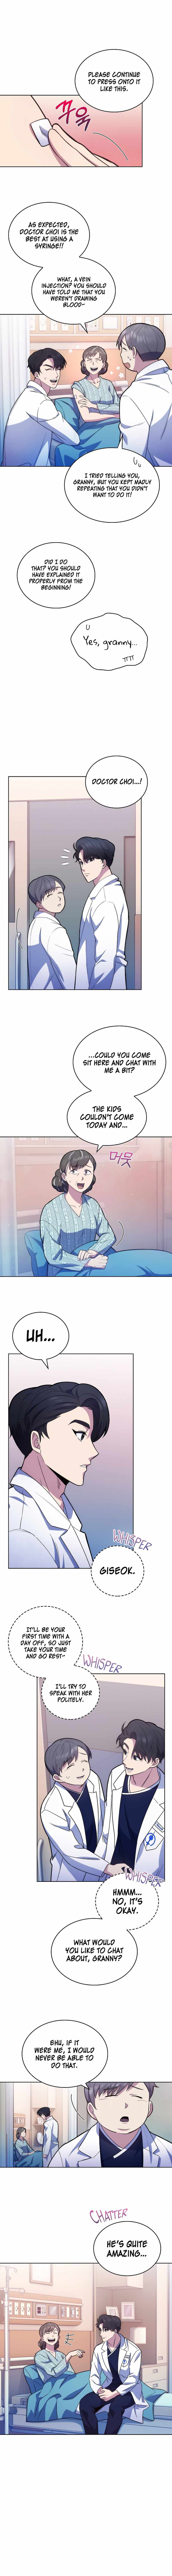 Level-Up Doctor (Manhwa) - Page 2